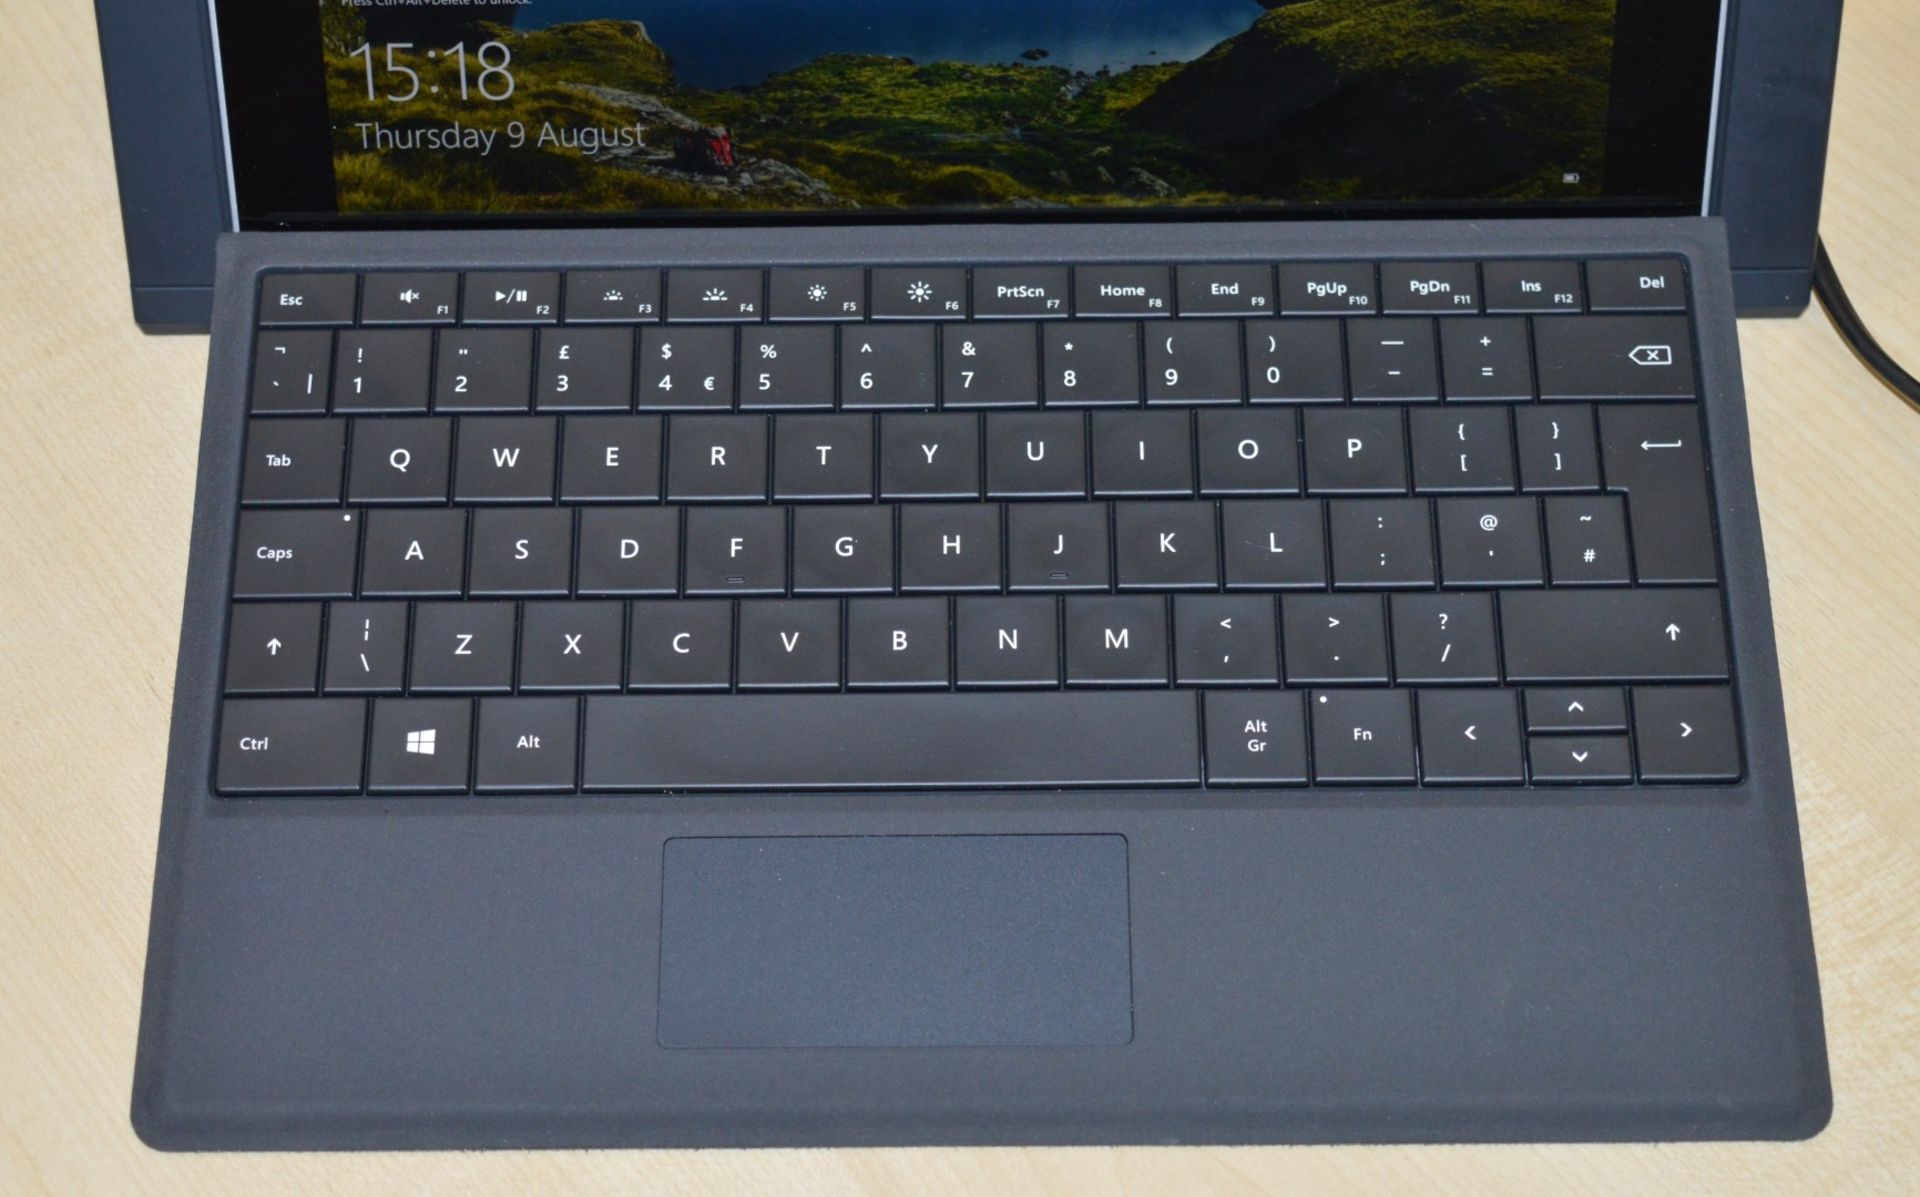 1 x Microsoft Surface 3 Wifi + LTE in Silver With Keyboard Cover and Charging Dock - Intel Atom x7- - Image 2 of 9